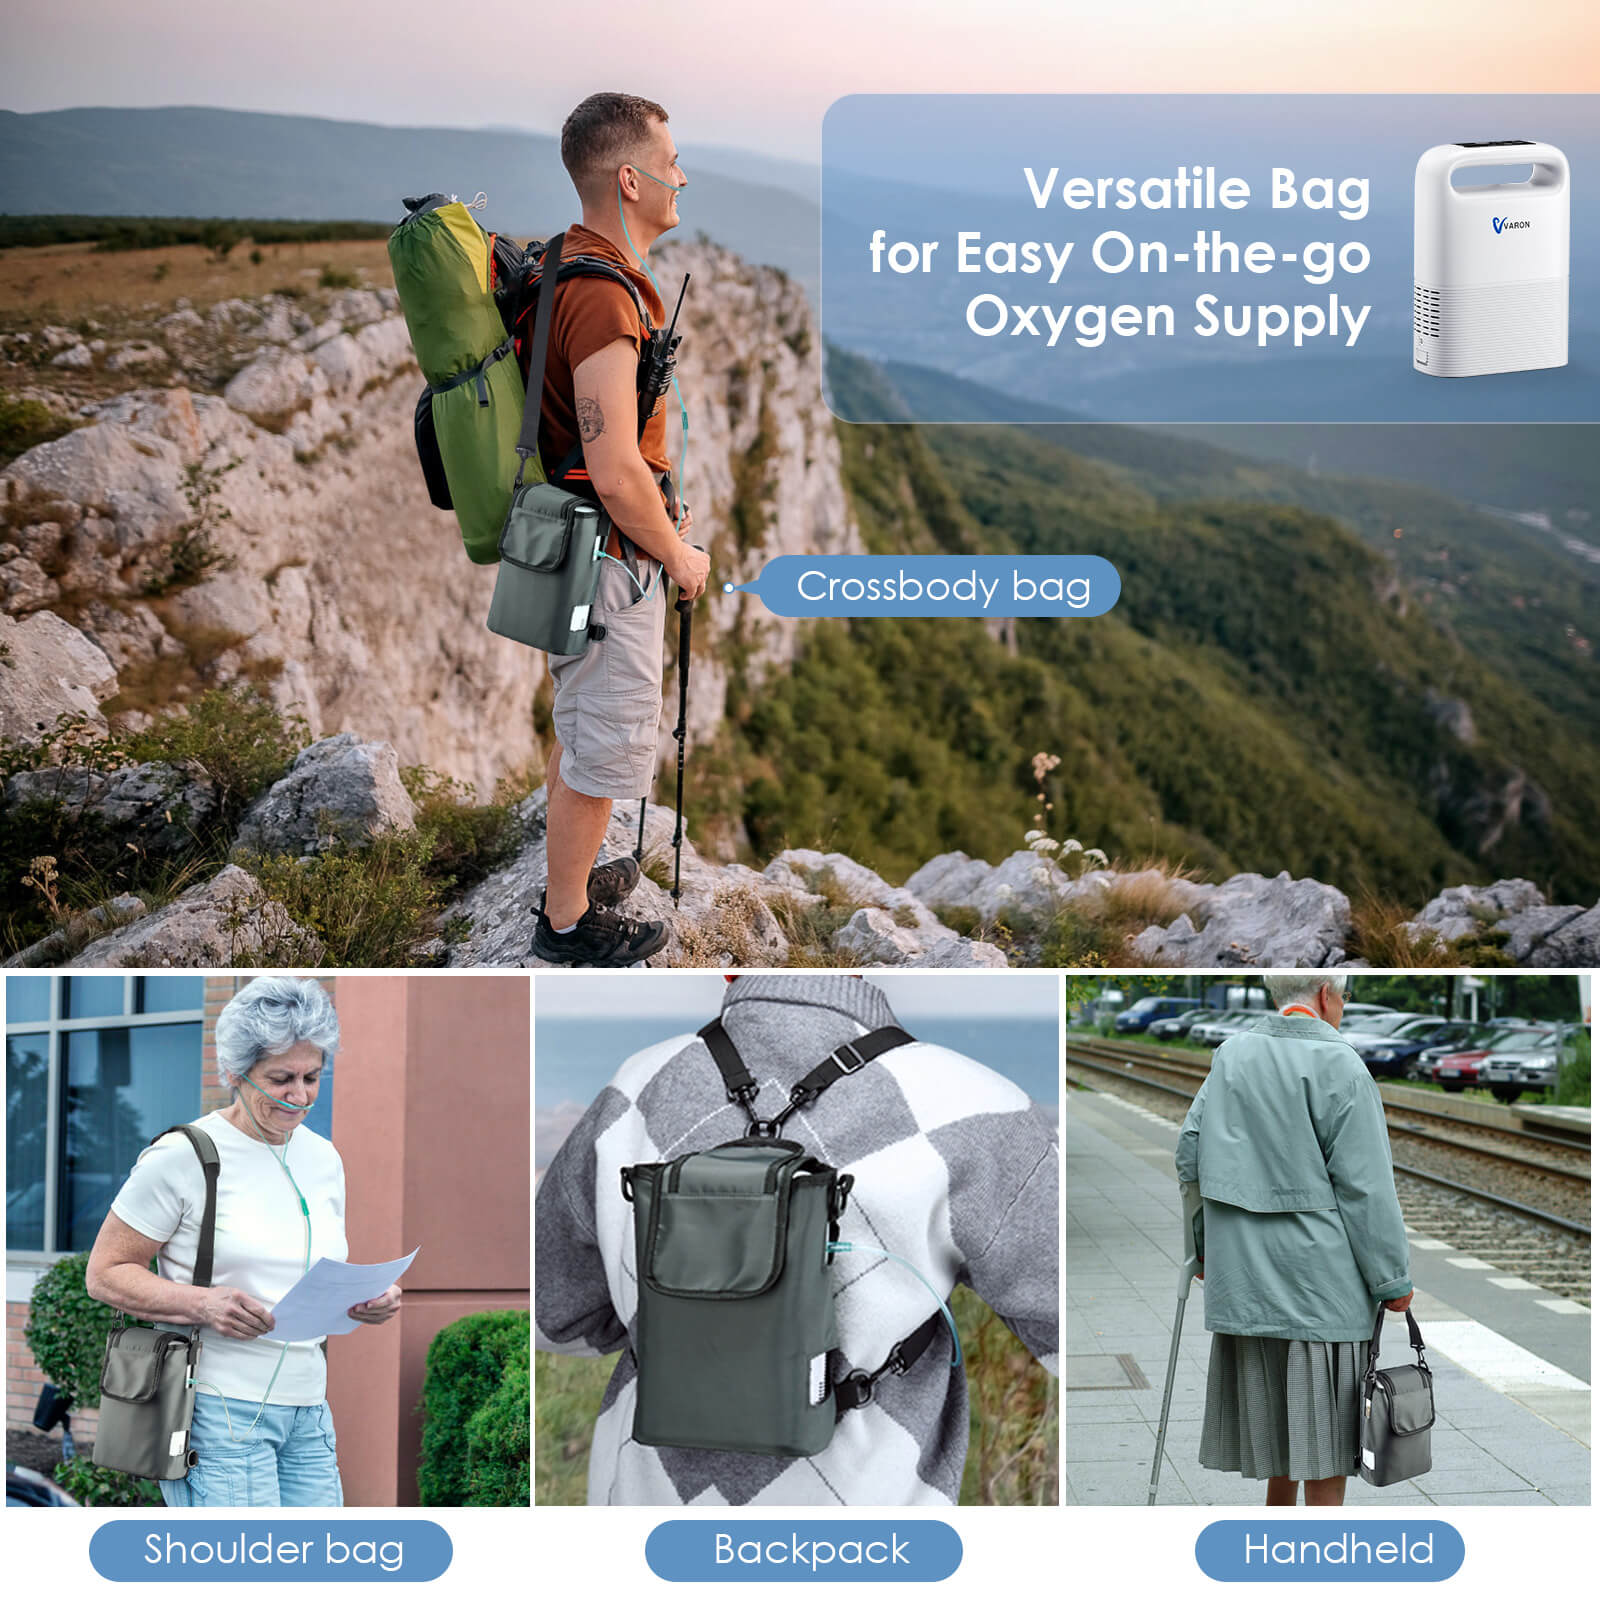 Portable Oxygen Concentrator NT-02+𝐴𝑛 𝐸𝑥𝑡𝑟𝑎 𝐵𝑎𝑡𝑡𝑒𝑟𝑦 8 𝐶𝑒𝑙𝑙/16 𝐶𝑒𝑙𝑙